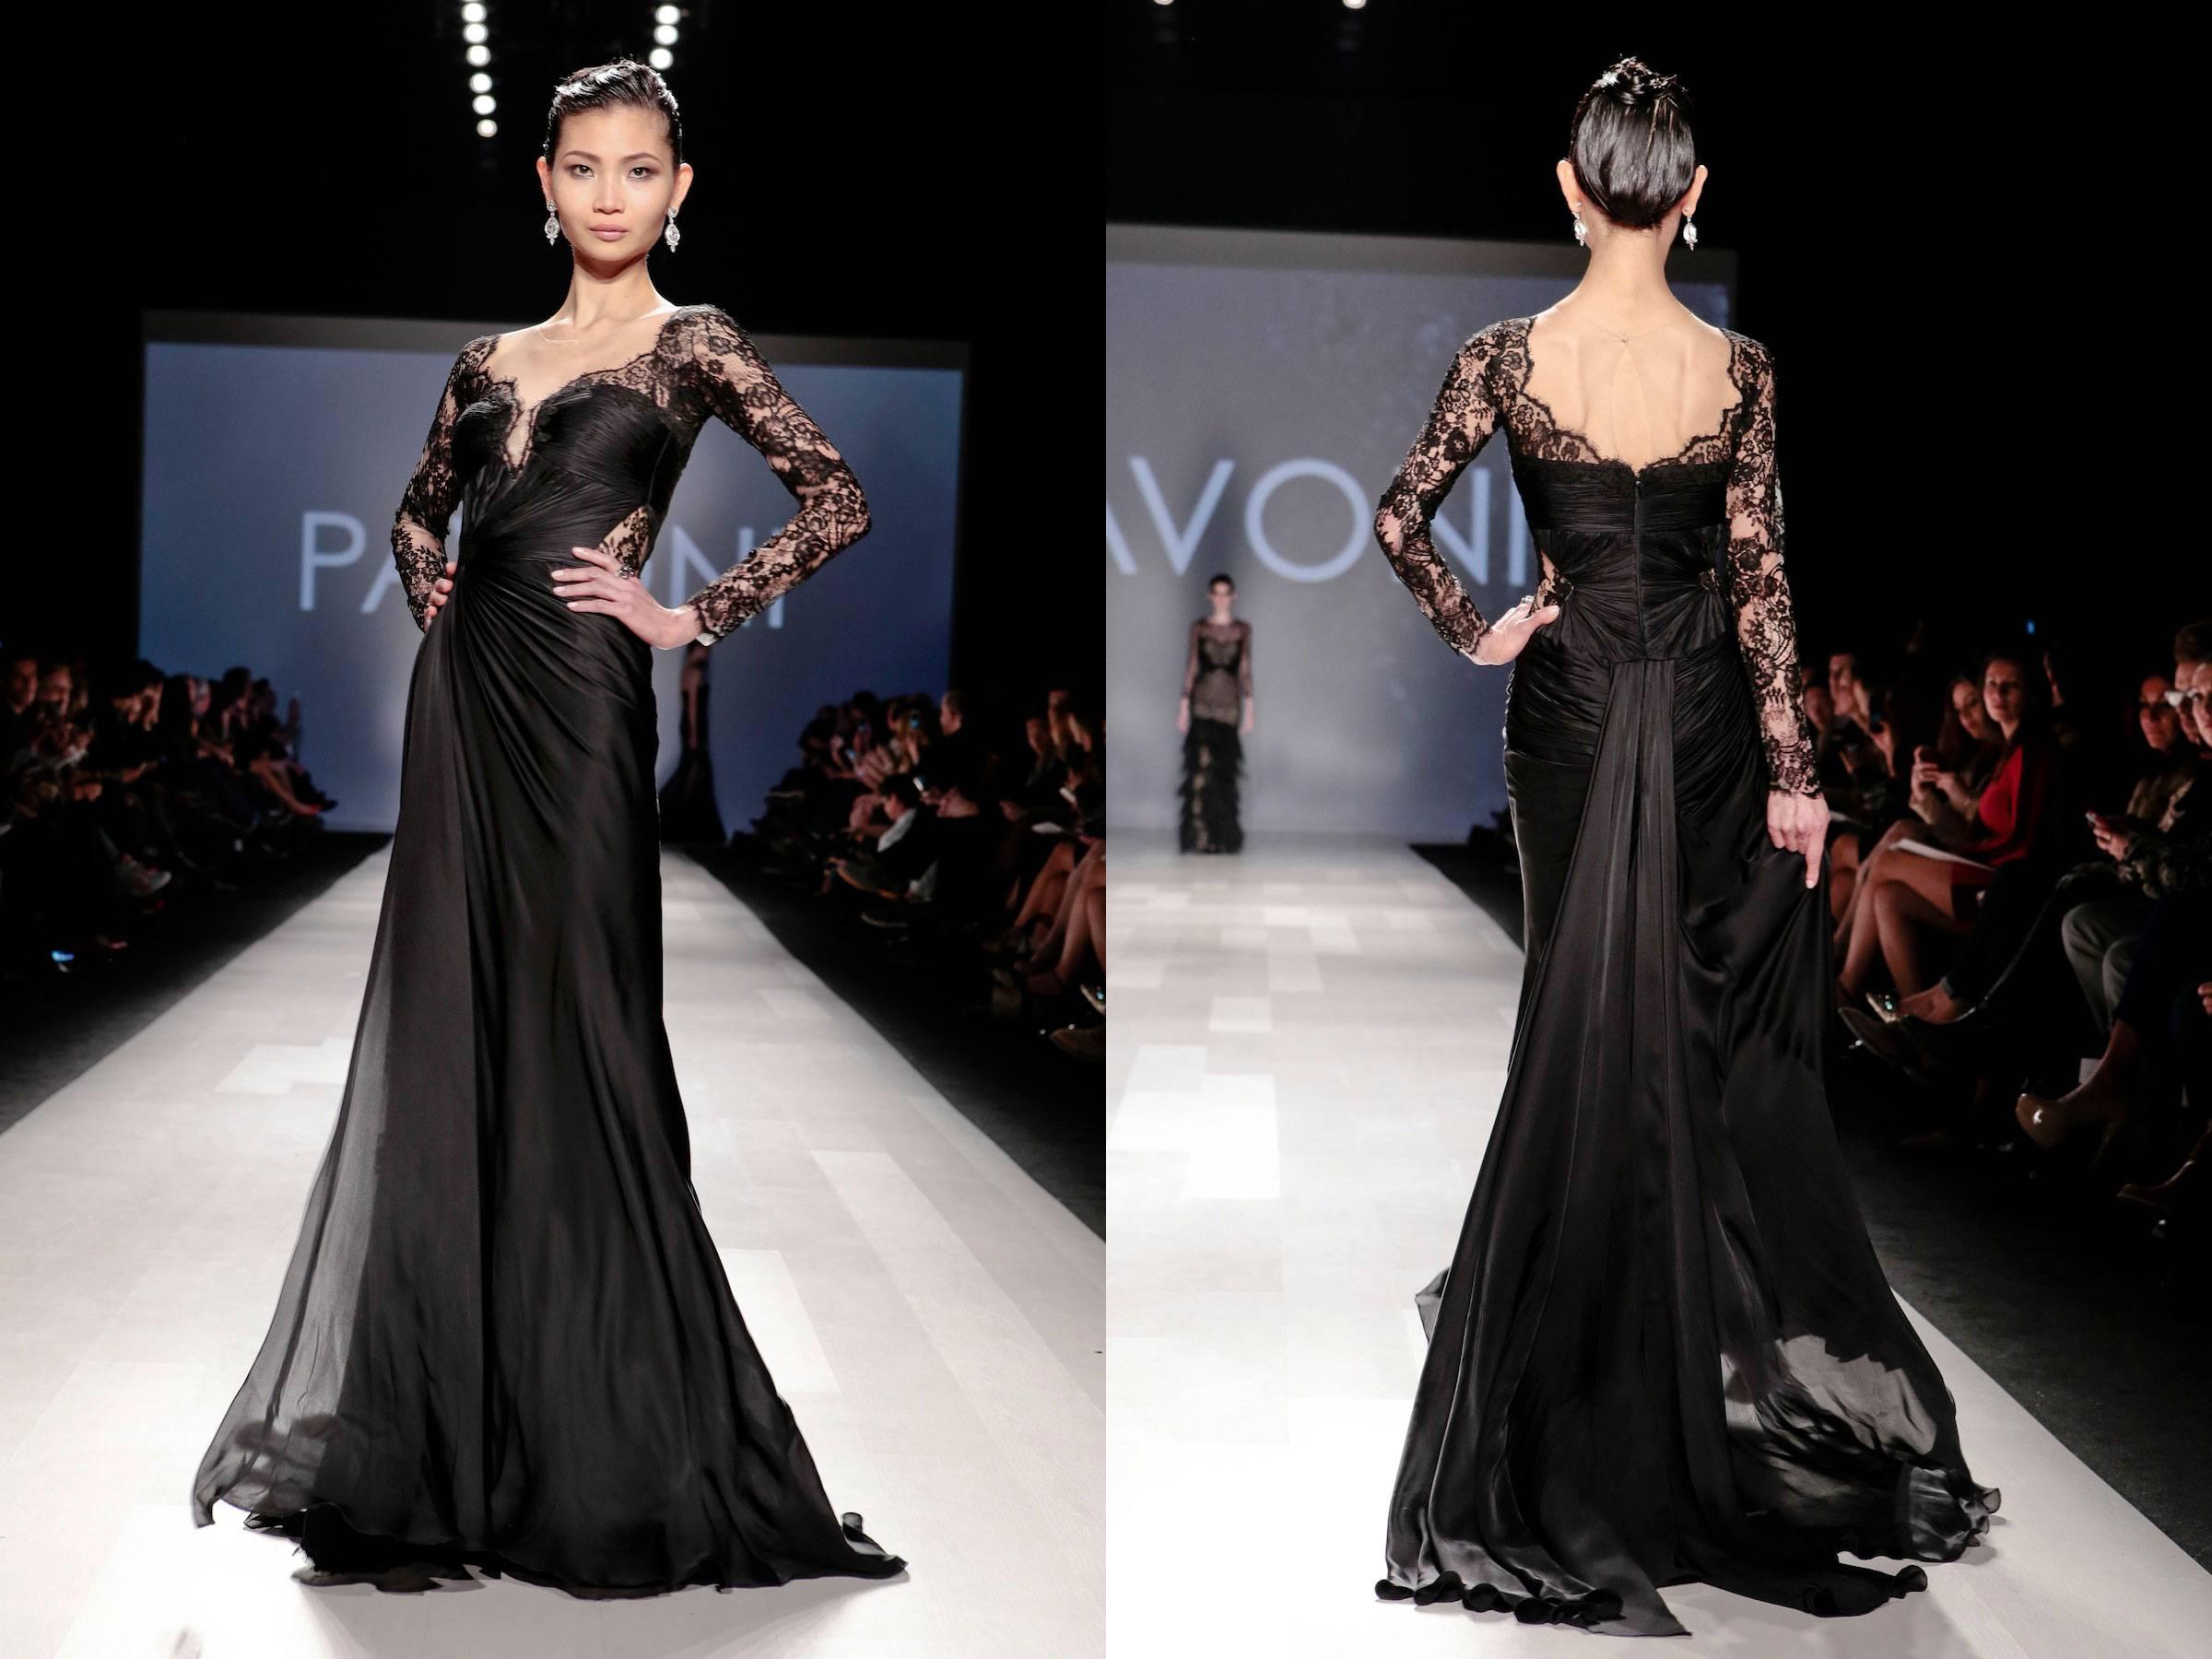 PAVONI Black Sheer Silk Chiffon / Illusion Lace Ruched Evening Gown from their AW 2013 runway collection.  Sheer black silk chiffon overlay gown with gathered ruched bust and waist, and black sheer illusion lace accents.   Upper shoulders and